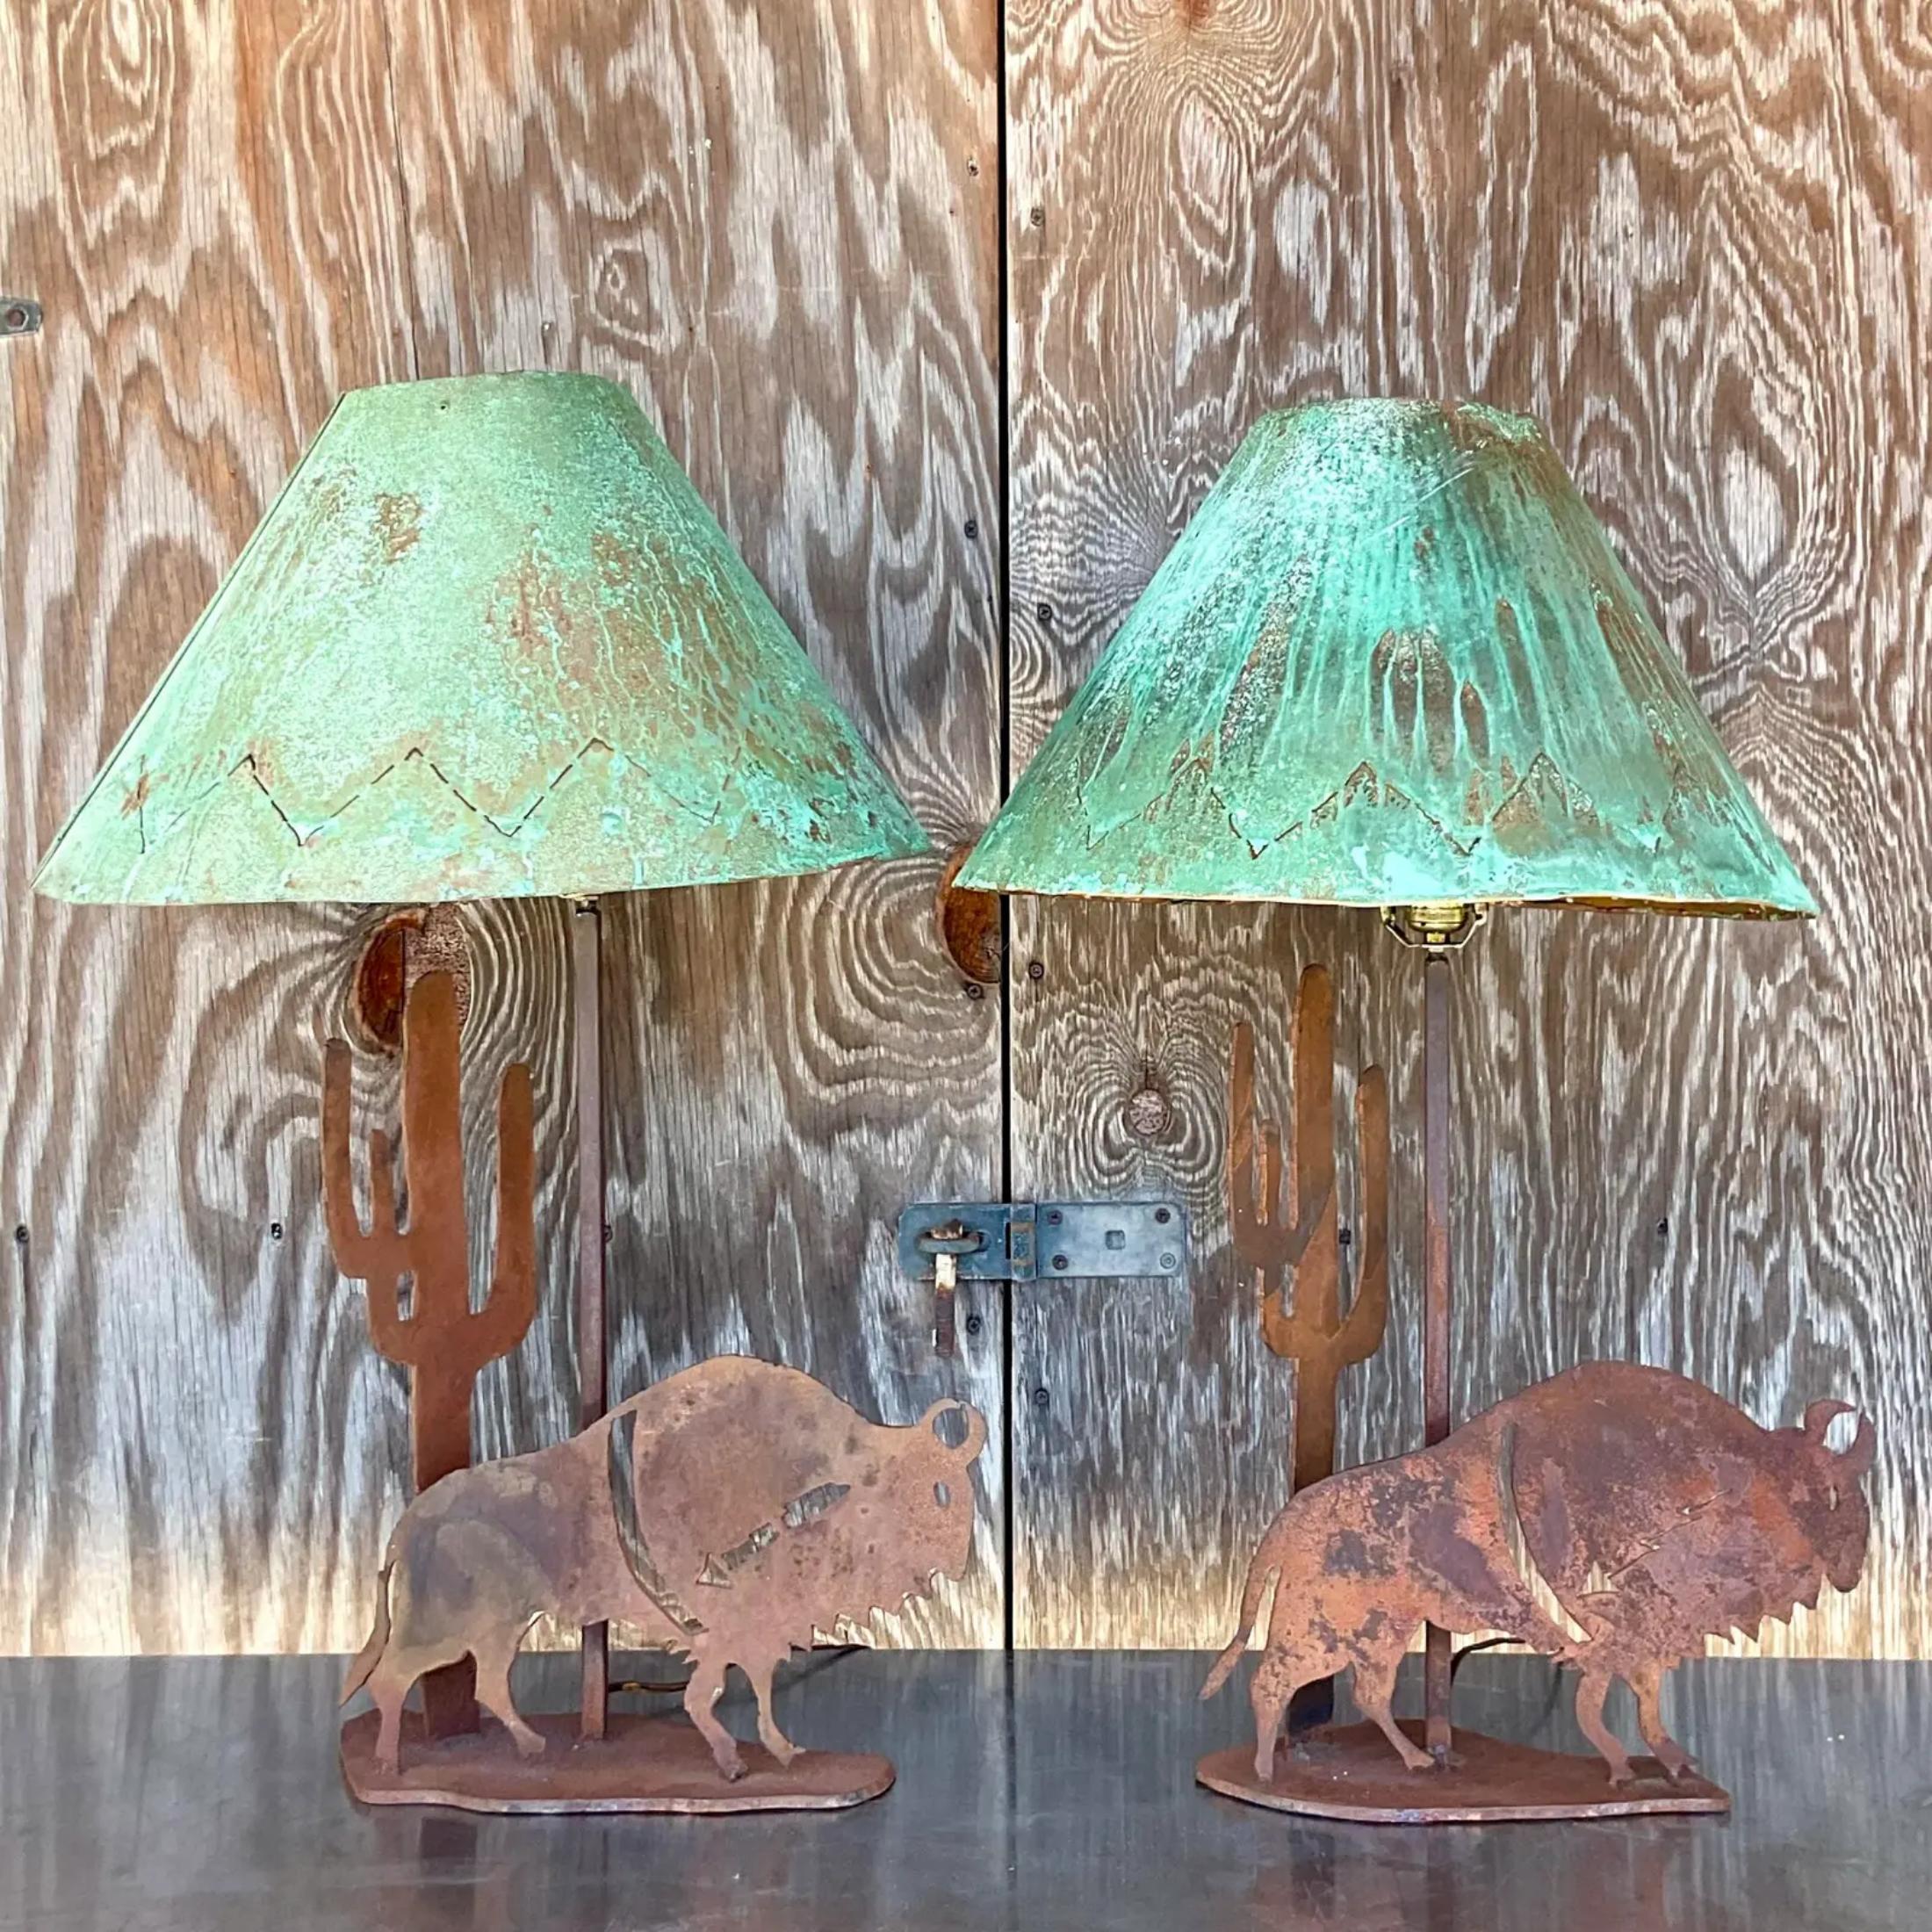 20th Century Vintage Rustic Punch Cut Lamps With Patinated Metal Shades - a Pair